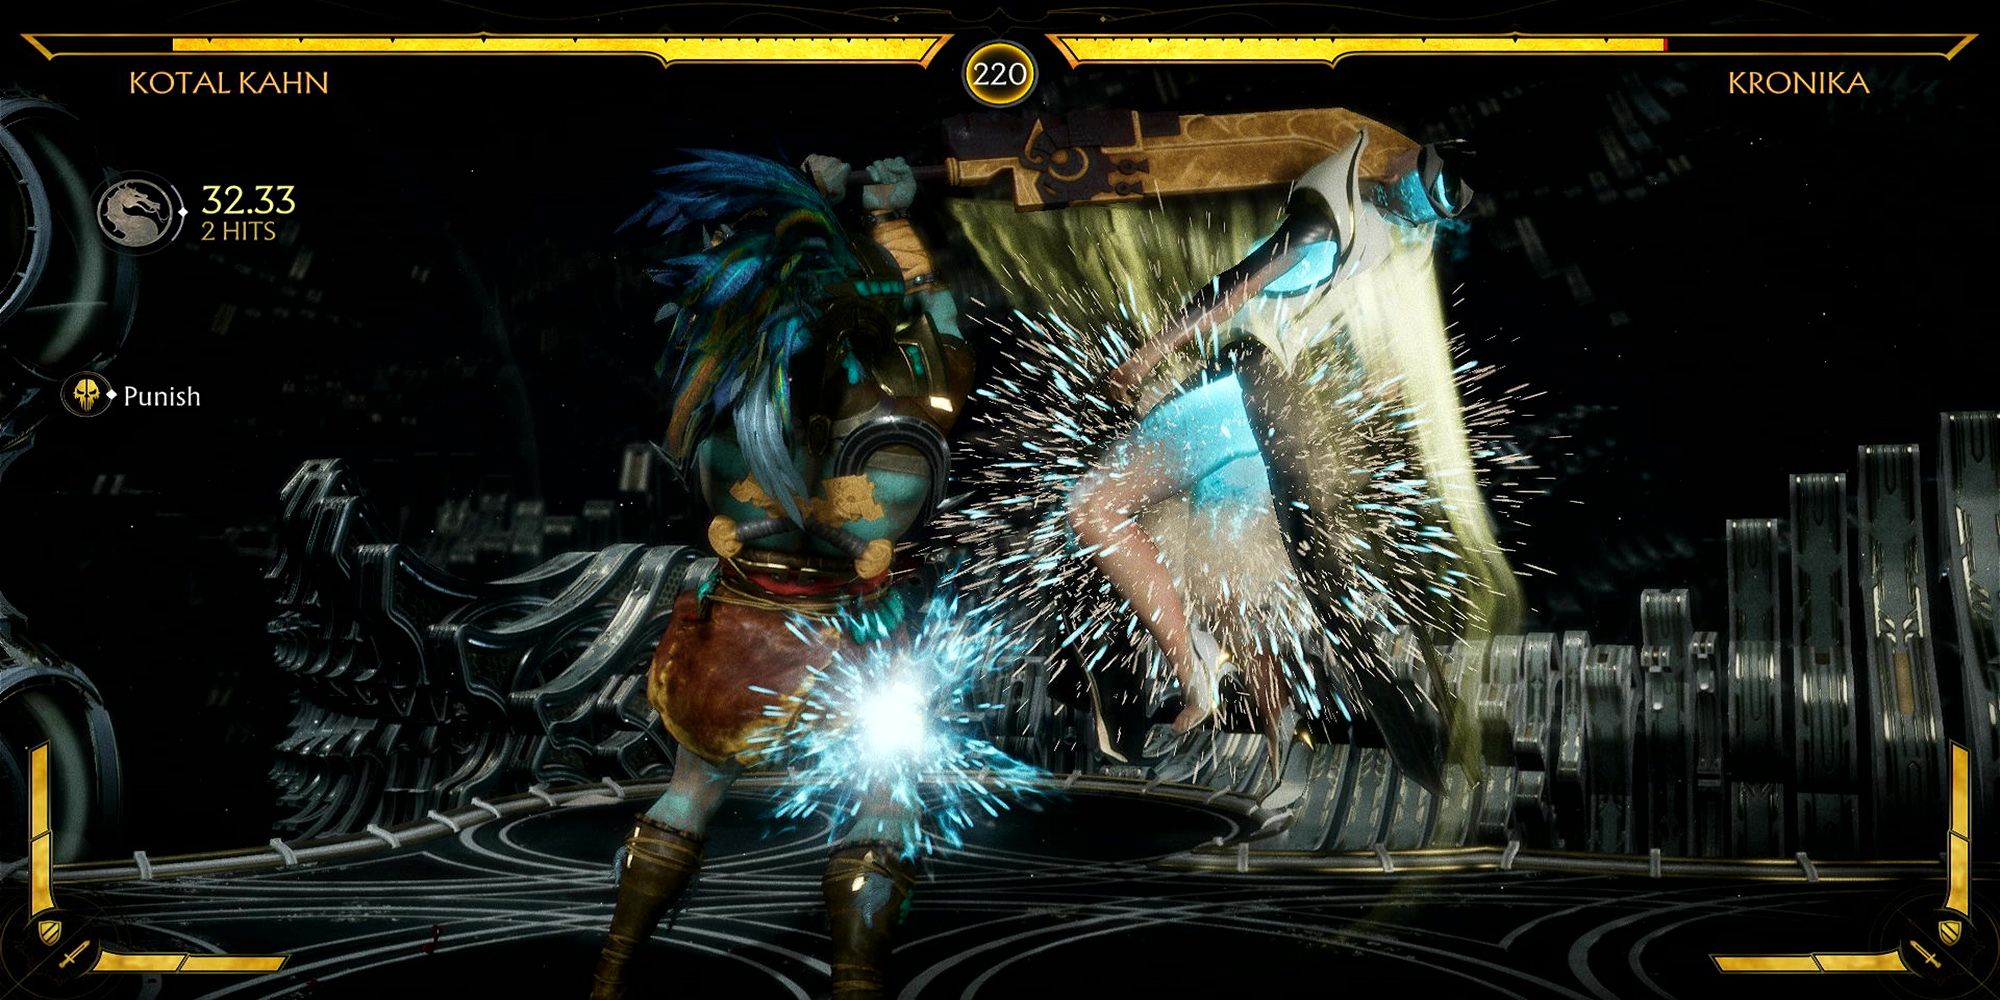 Kotal Kahn sends his sword into Kronika, turning her to dust, in front of her Hourglass in Mortal Kombat 11.